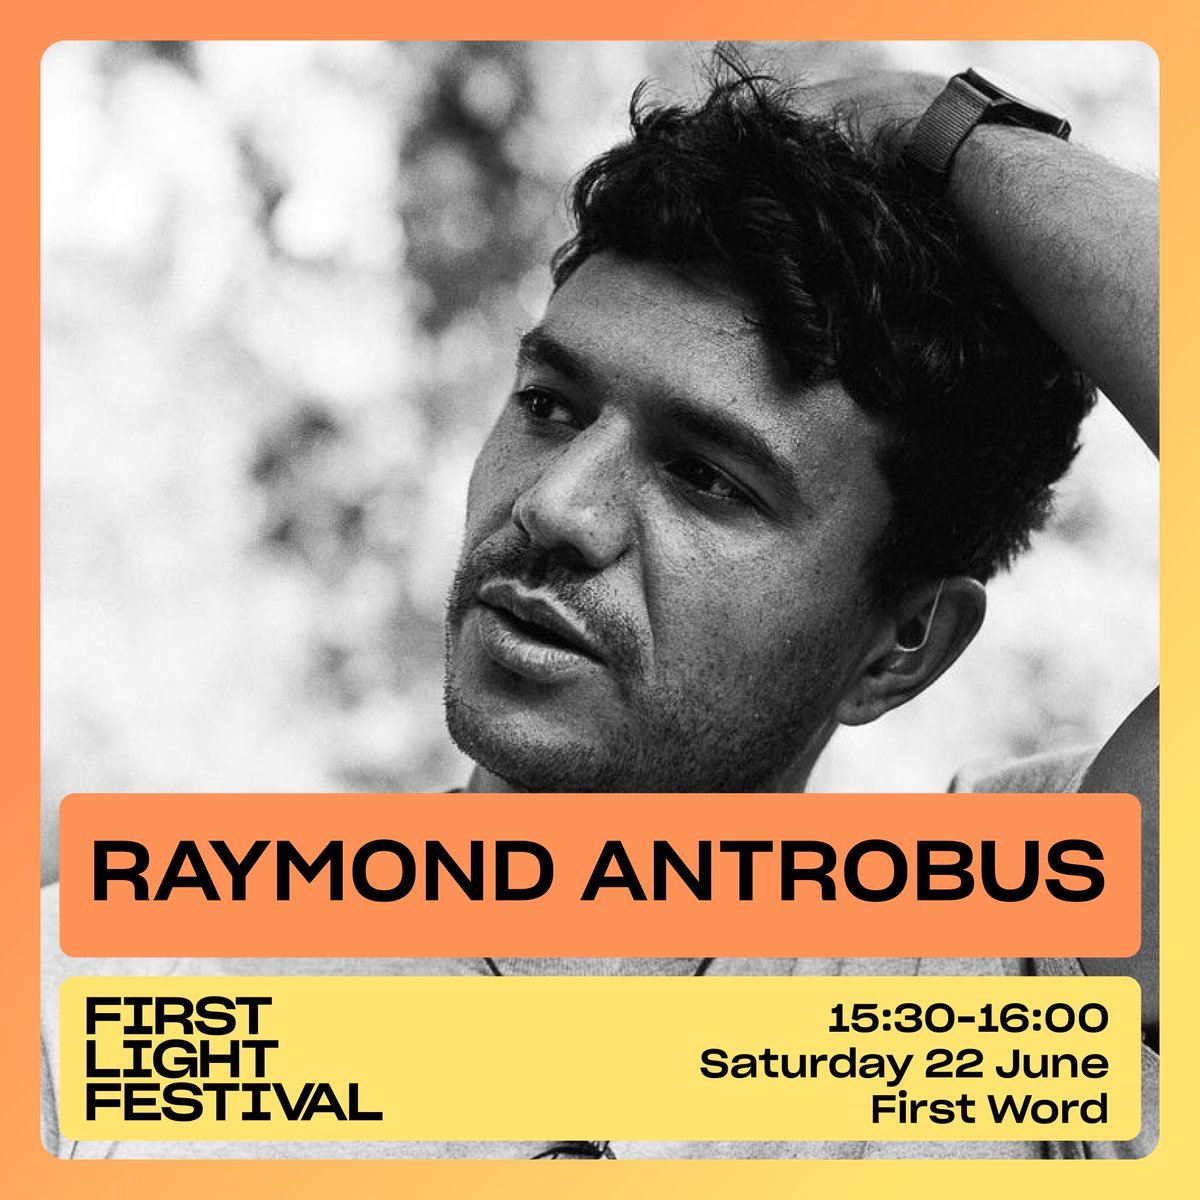 The first ever poet to be awarded the Rathbone Folio Prize for best work of literature in any genre, @RaymondAntrobus will be closing out the First Word stage at this year's festival on Sunday 23 June! firstlightlowestoft.com/events-2024/ra… #FirstLightFestival2024 #Lowestoft